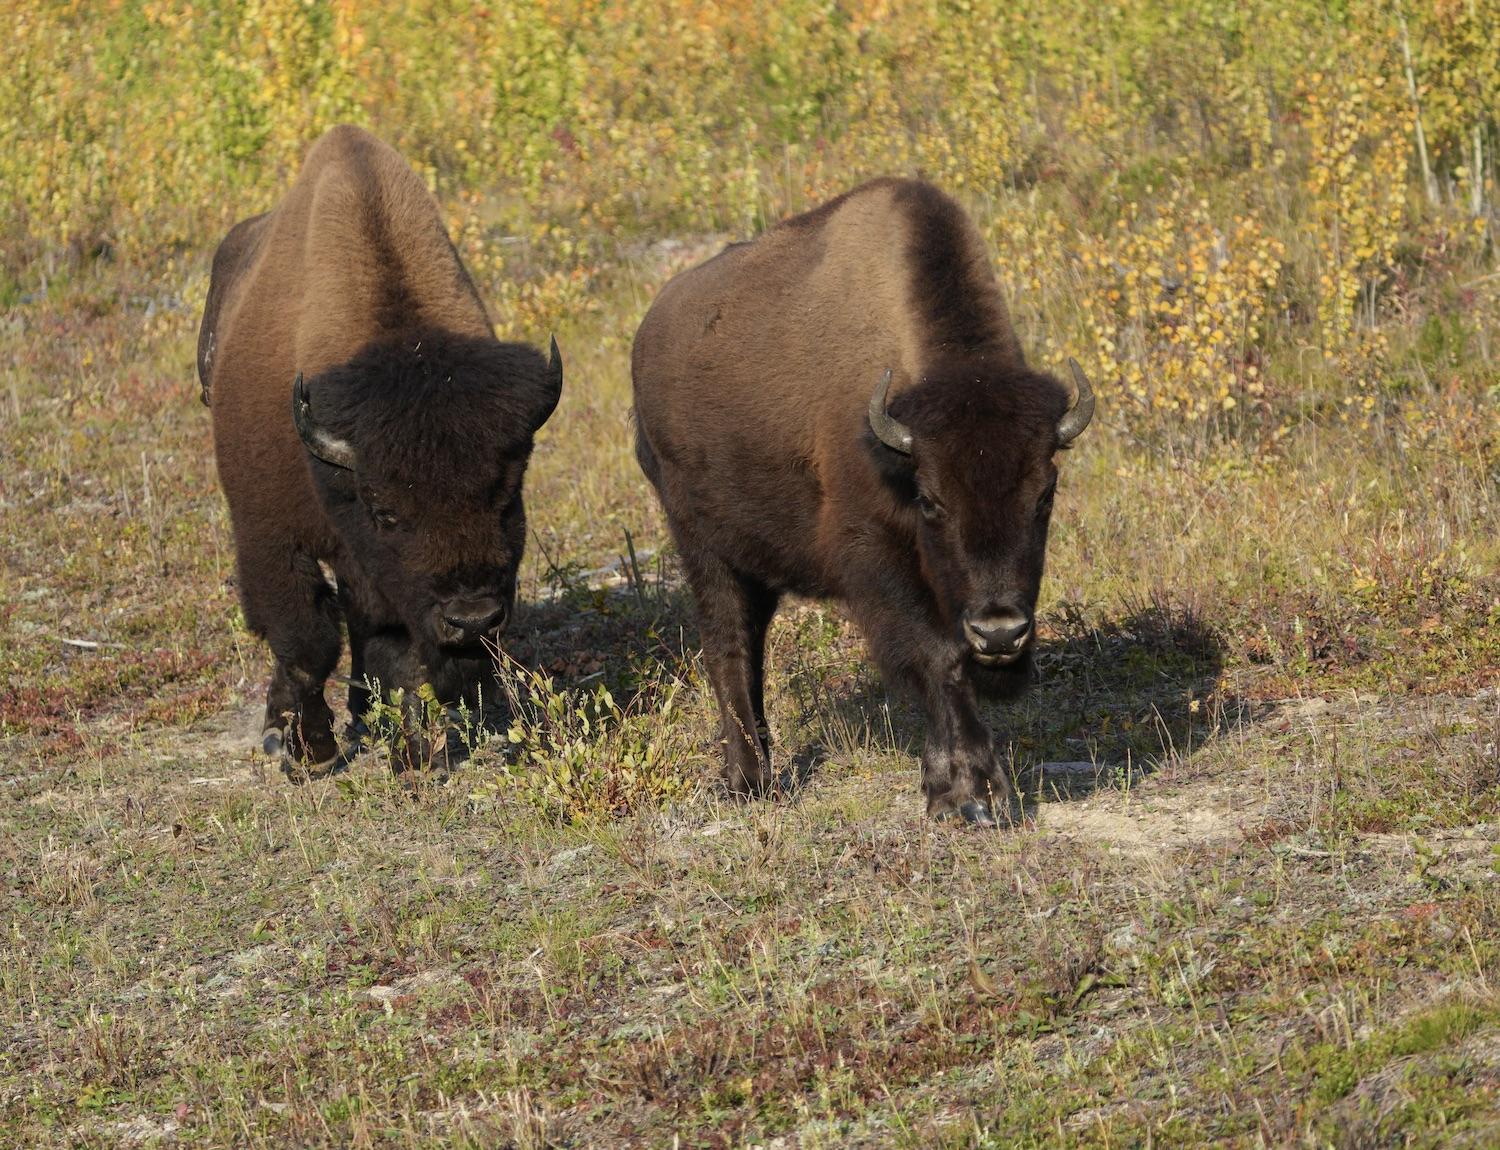 Wood Buffalo National Park has the world's largest free-roaming and self-regulating herd of bison.